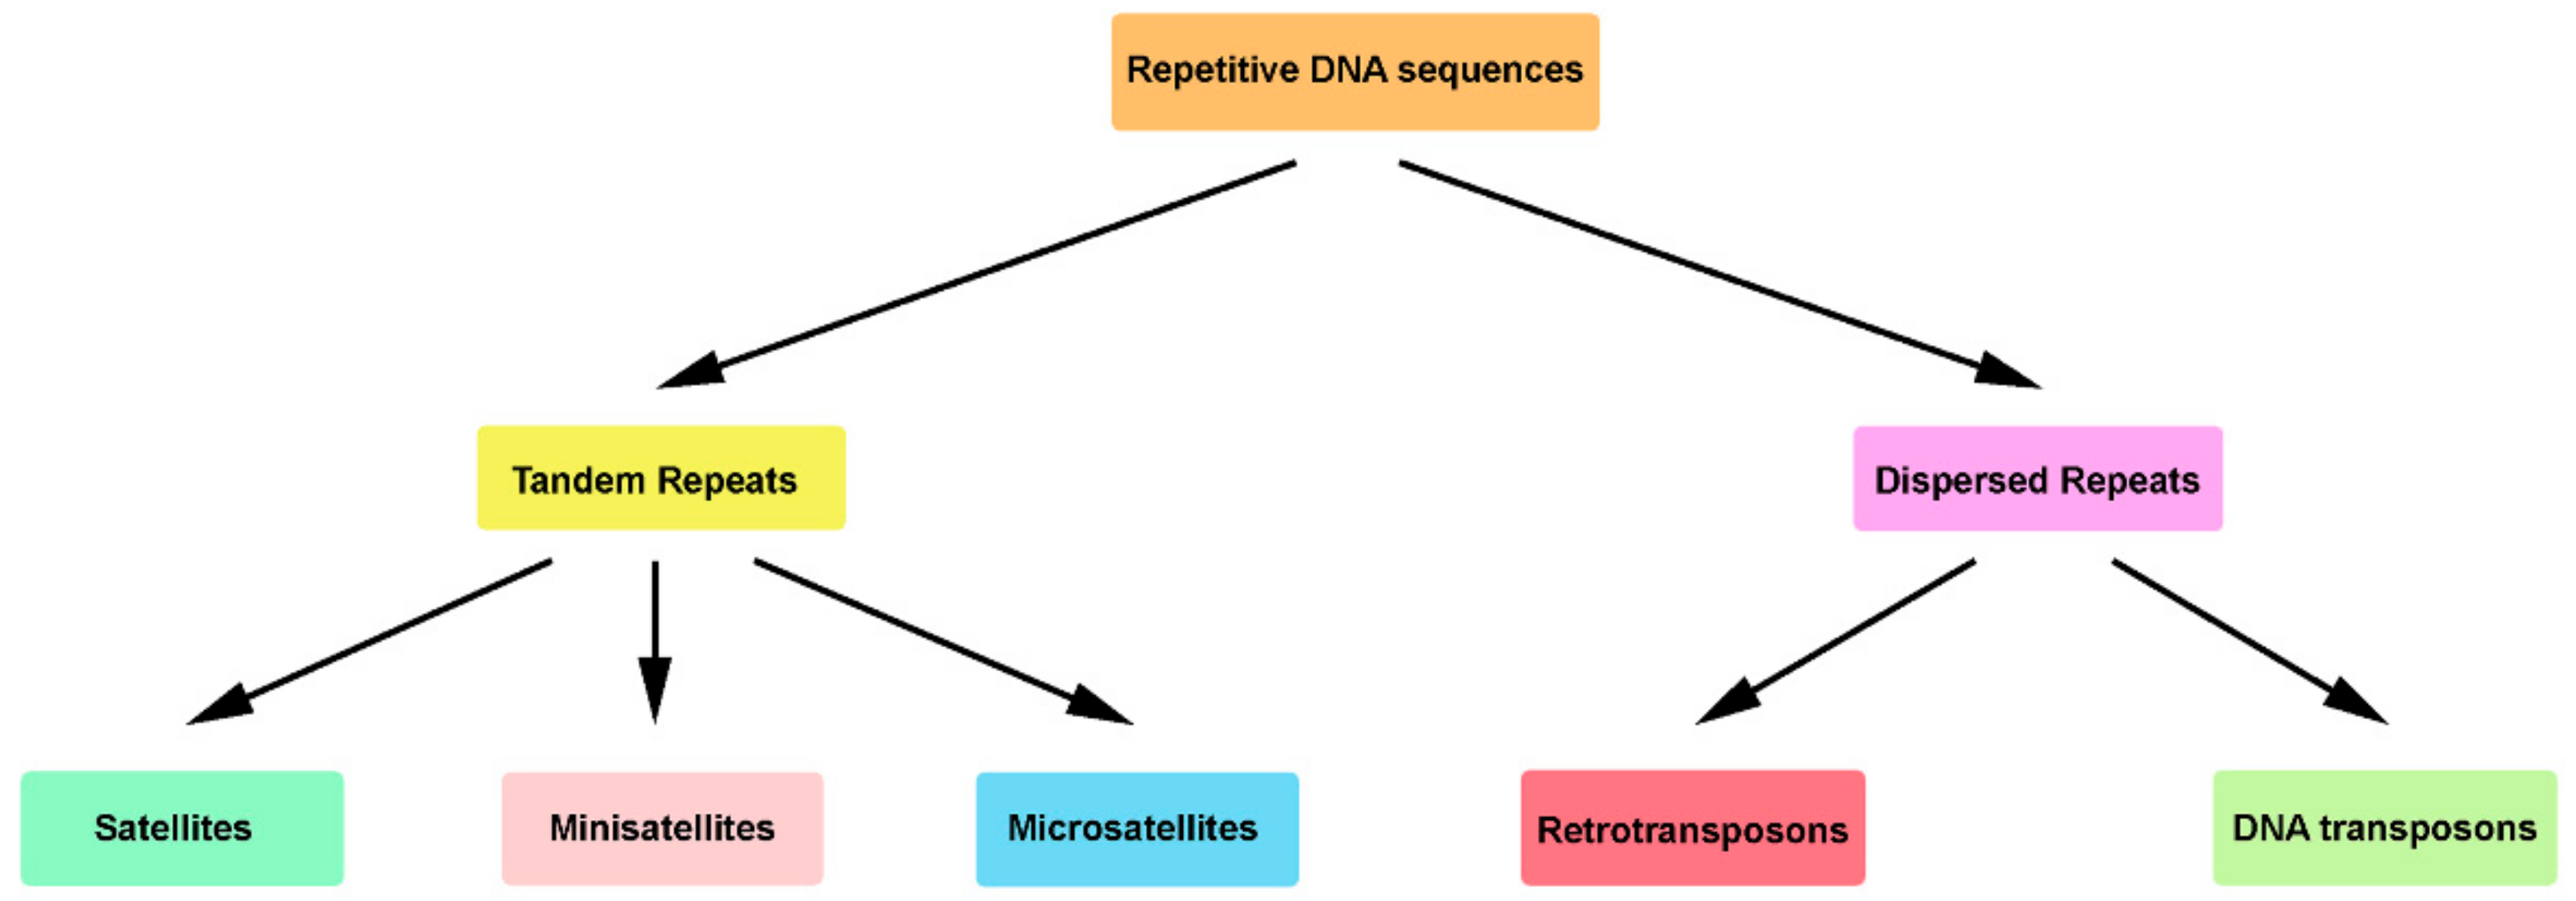 transposable elements are dna sequences that